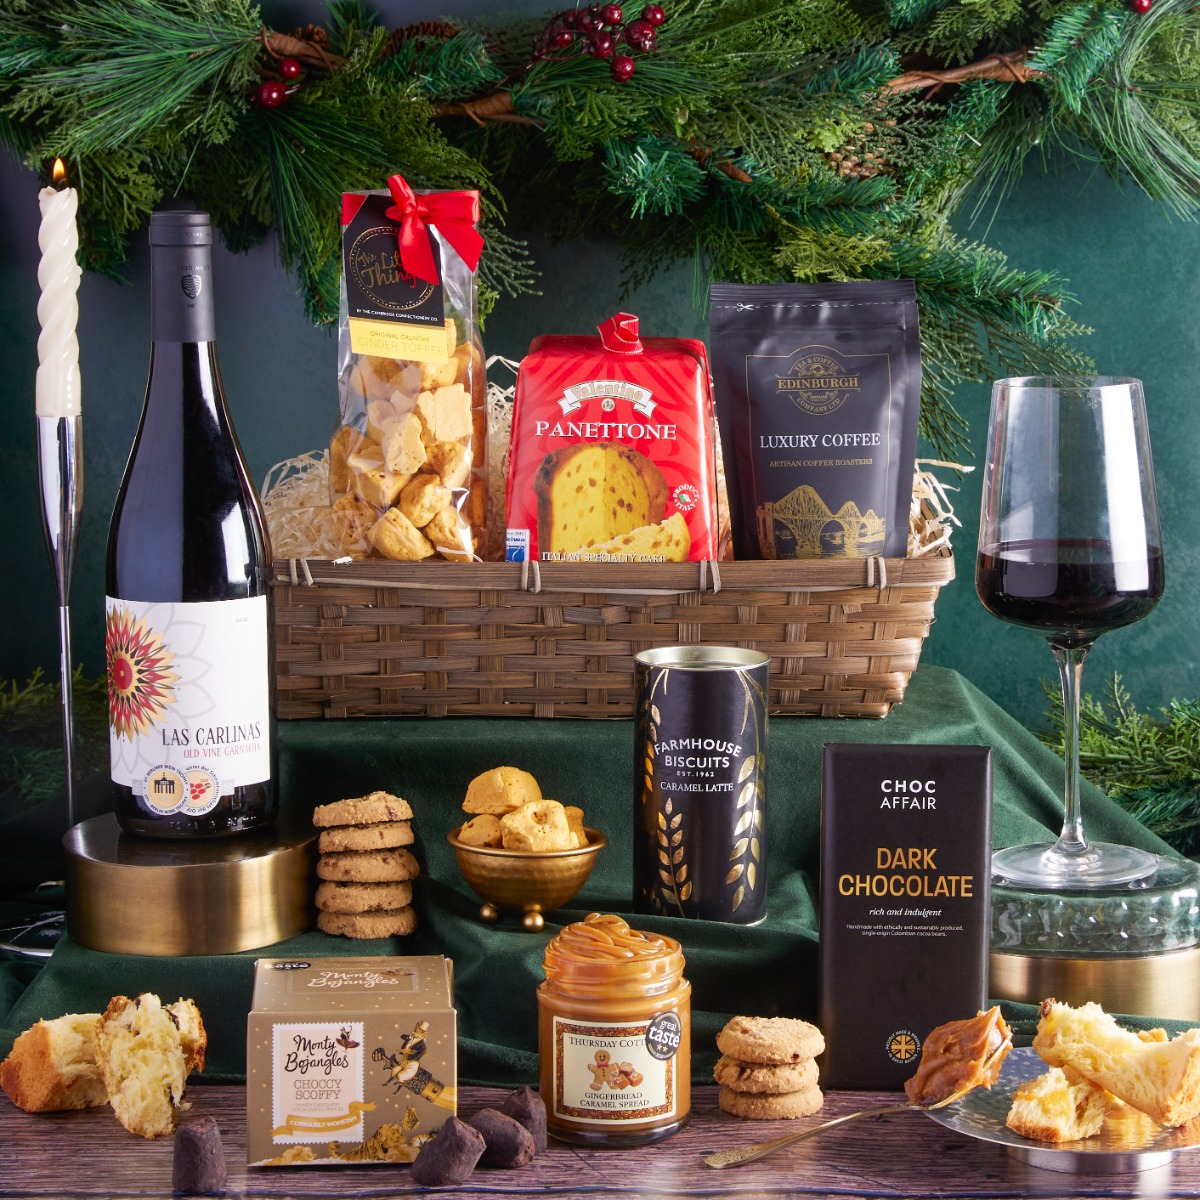 The Gold Standard Christmas Hamper with contents on display as recommendation for a hamper for a neighbour or friend